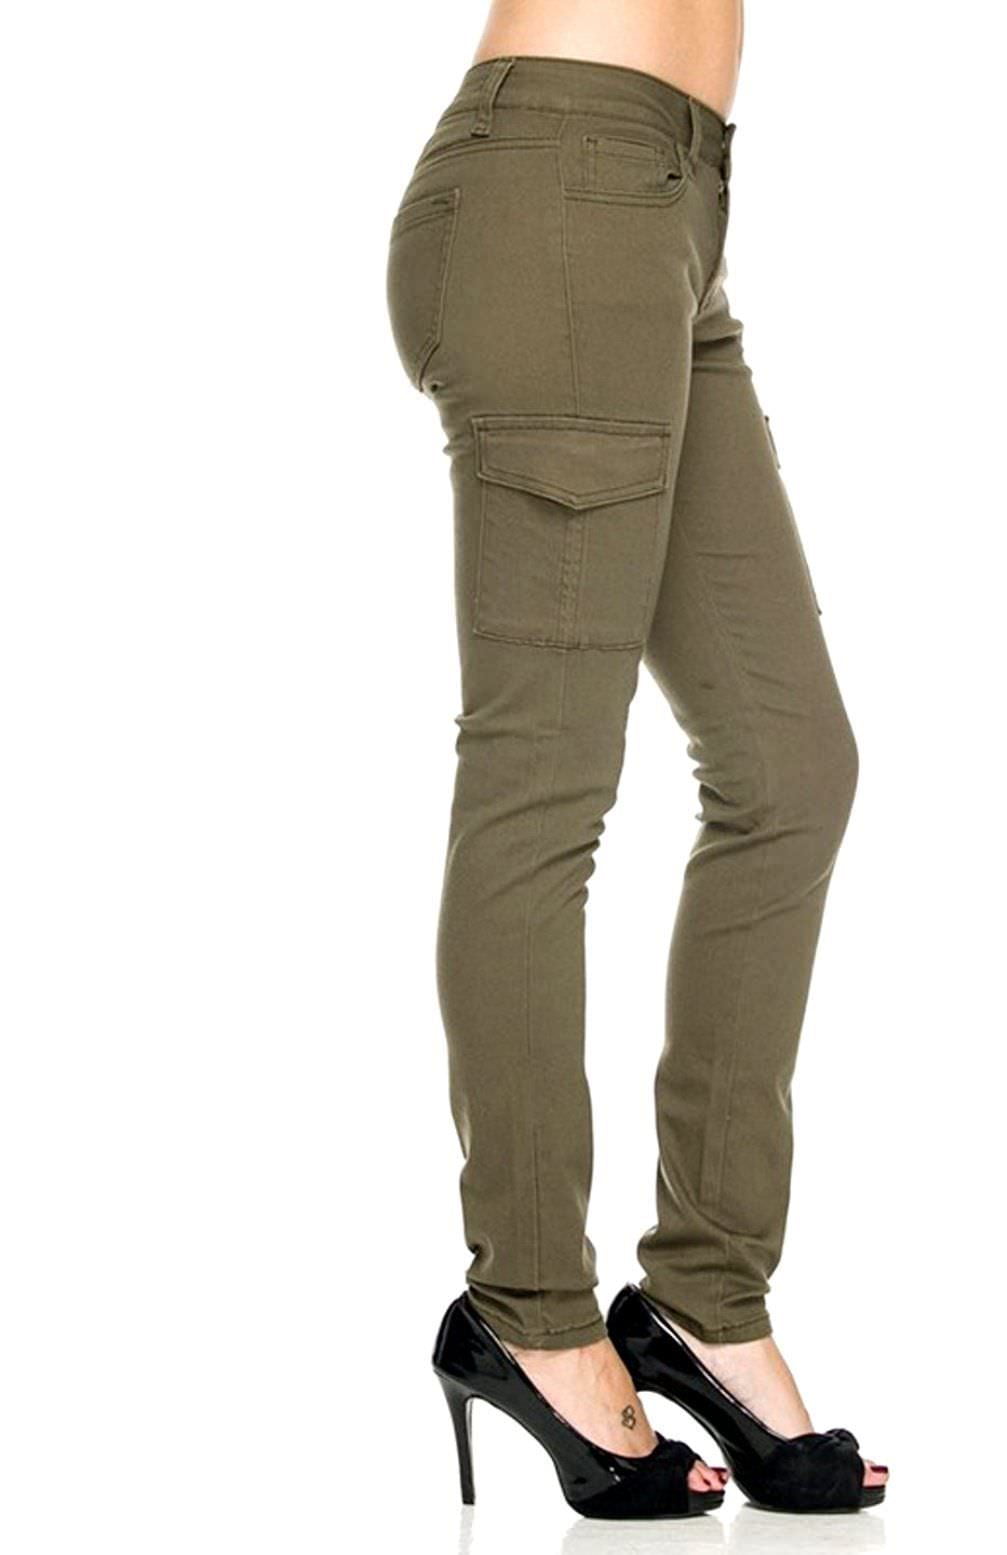 SKINNY CARGO PANTS BY ANATOMIE ANA7400114 – Luxe Levels